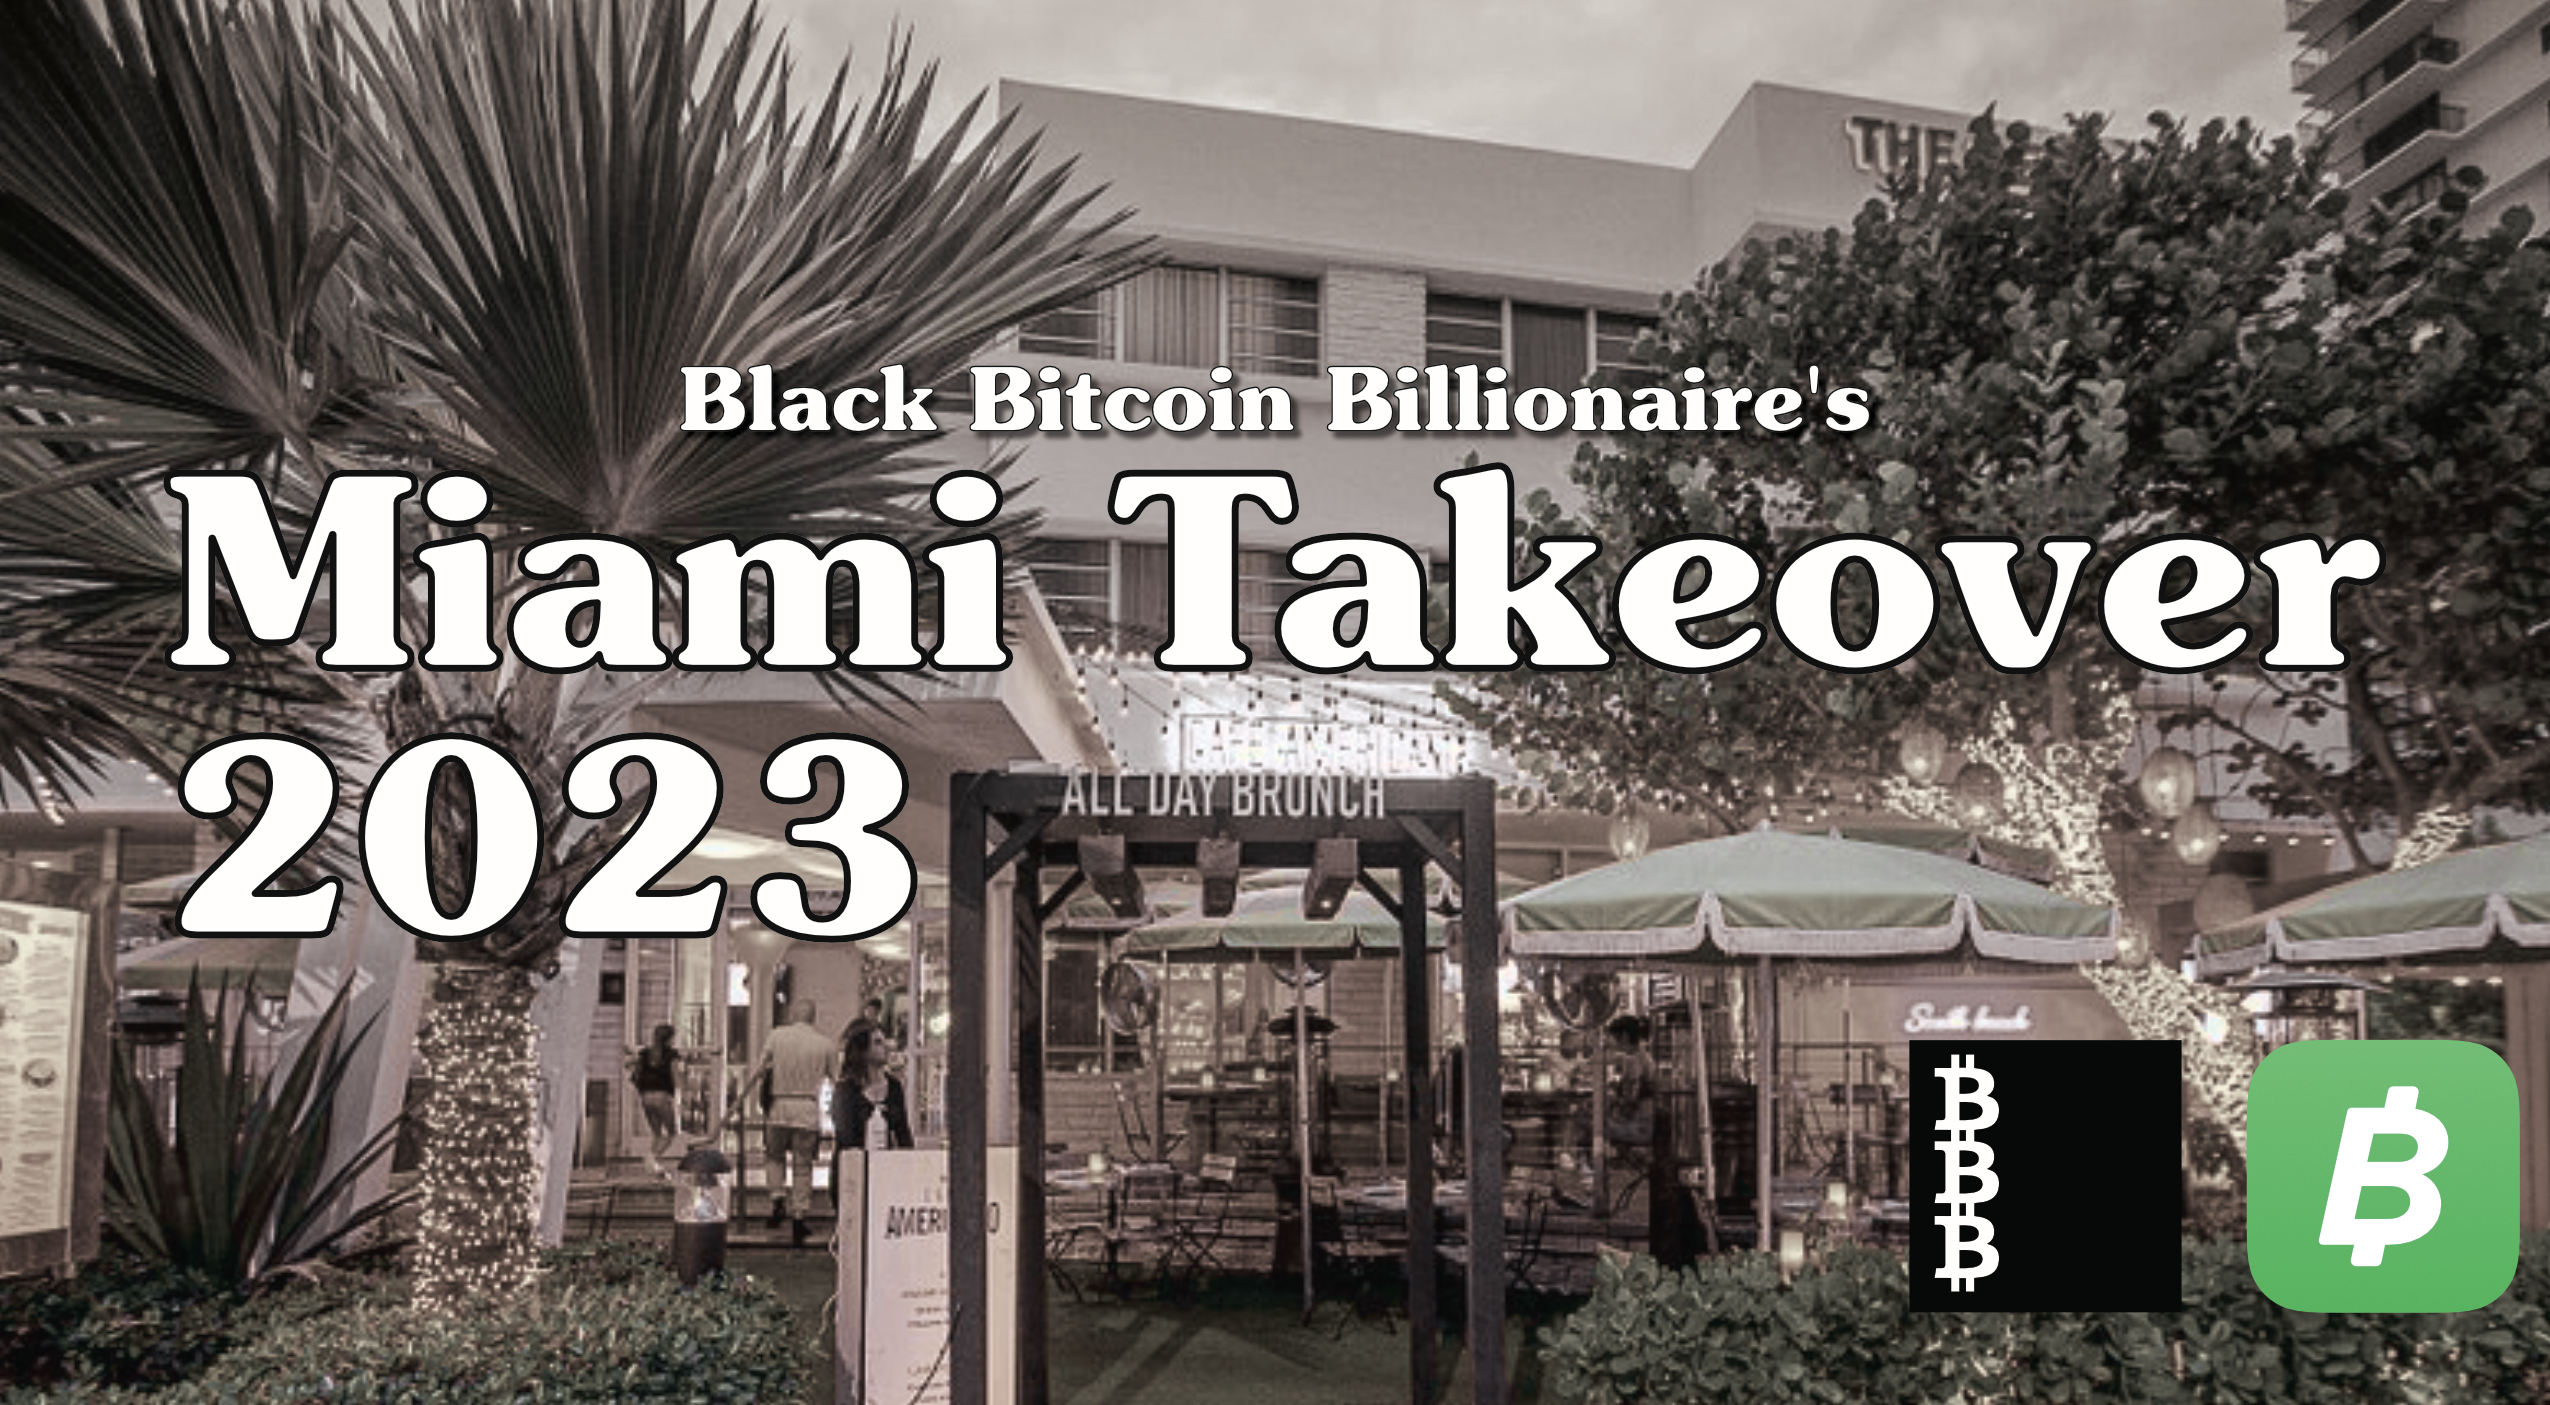 The Highly-Anticipated Return of the Black Bitcoin Billionaire Miami Takeover, Sponsored by Cash App